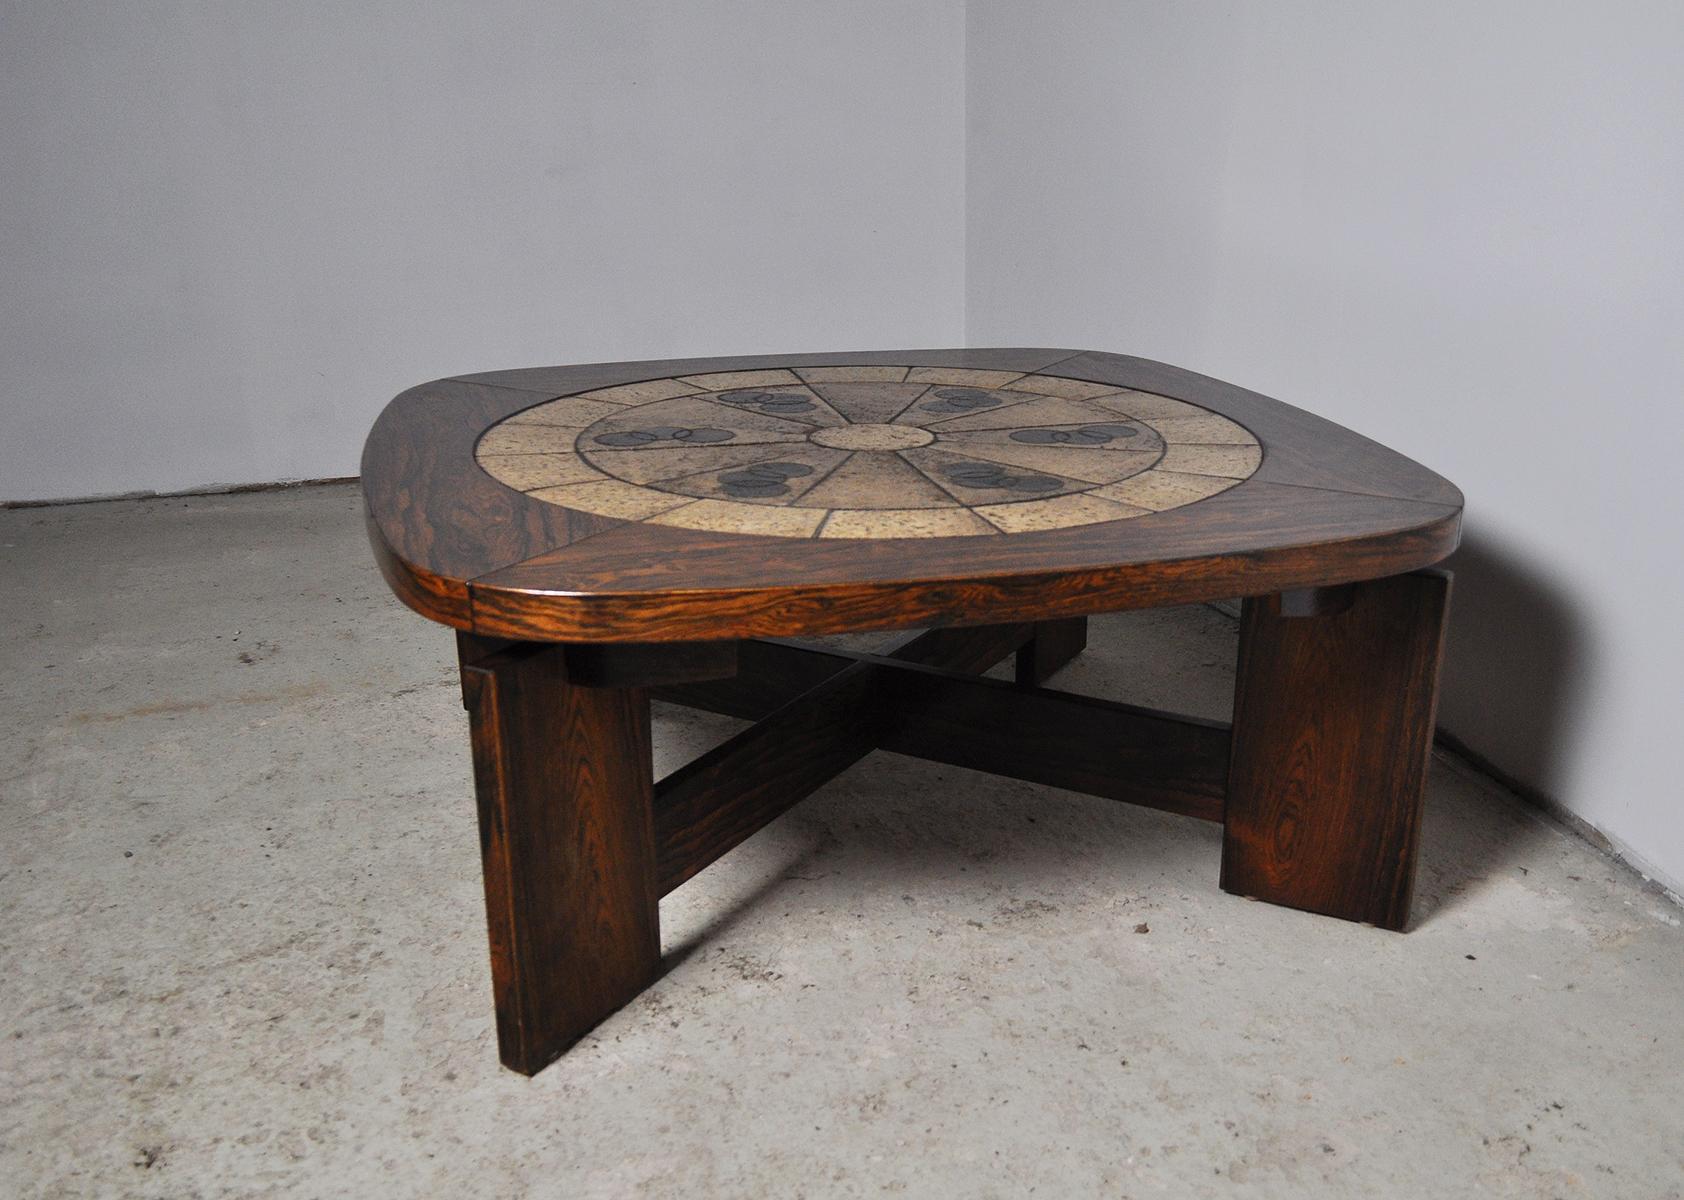 Rosewood veneer coffee table with ceramic tiles made in the 1970s.The table has jointed wooden legs supported by an X-base. 
Good vintage condition, signs of wear consistent with age and use.

Dimensions: 
Width 134.5 x 134.5 cm and 113.5 x